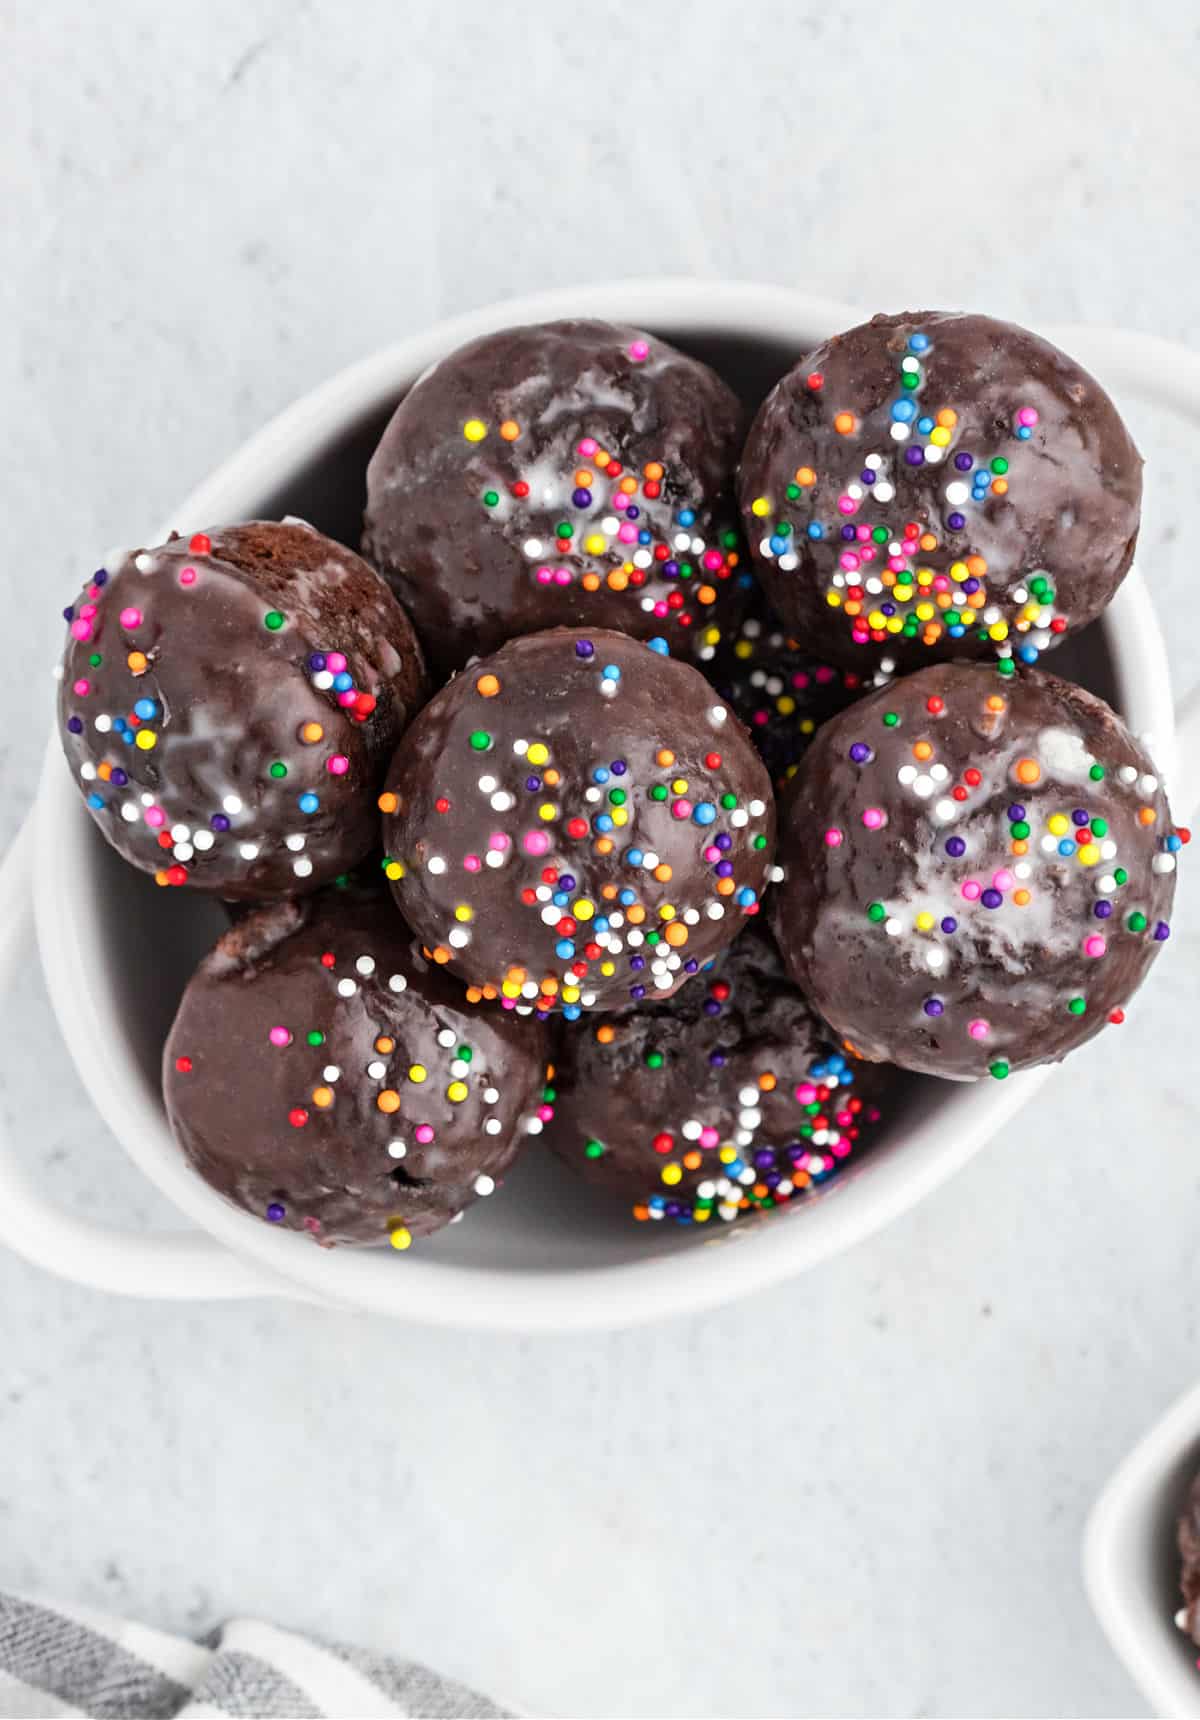 Chocolate glazed donut holes topped with colorful sprinkles in a white bowl.